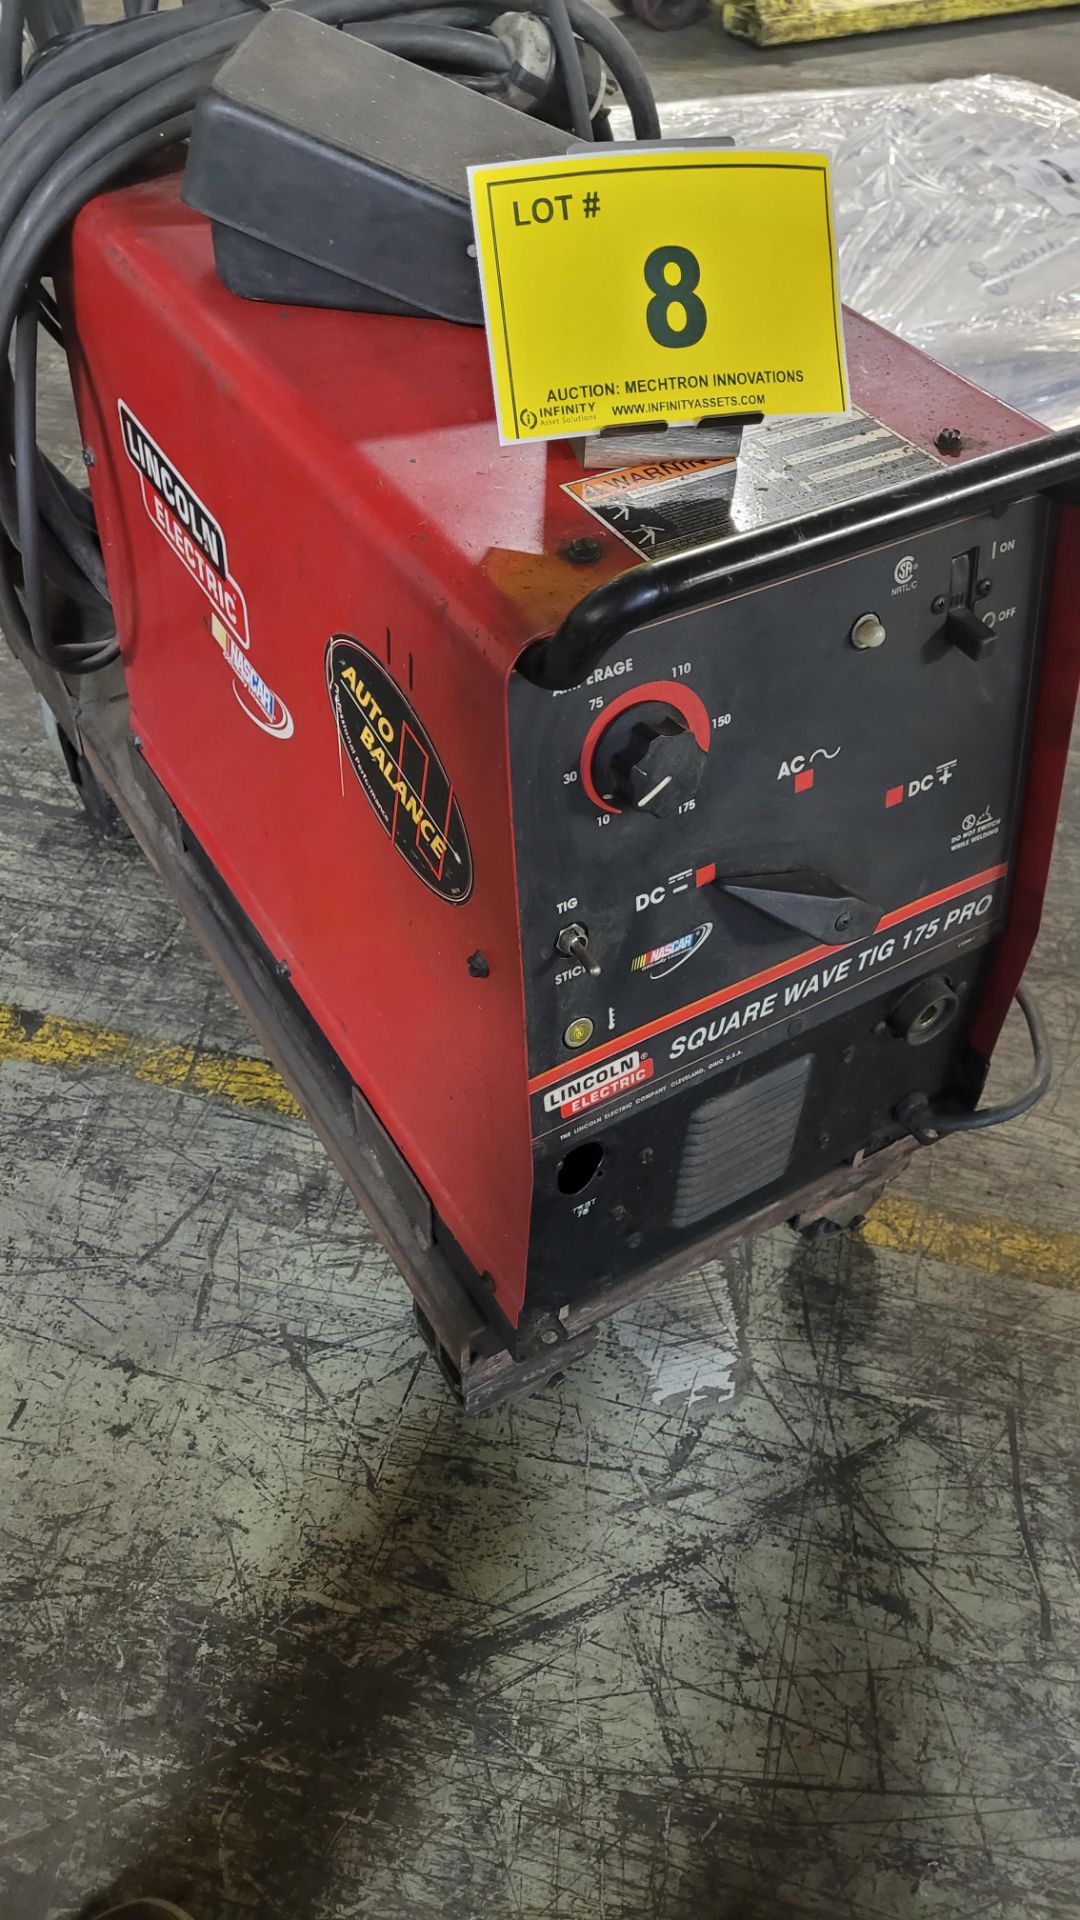 LINCOLN ELECTRIC SQUARE WAVE TIG 175 PRO WELDER - Image 2 of 3